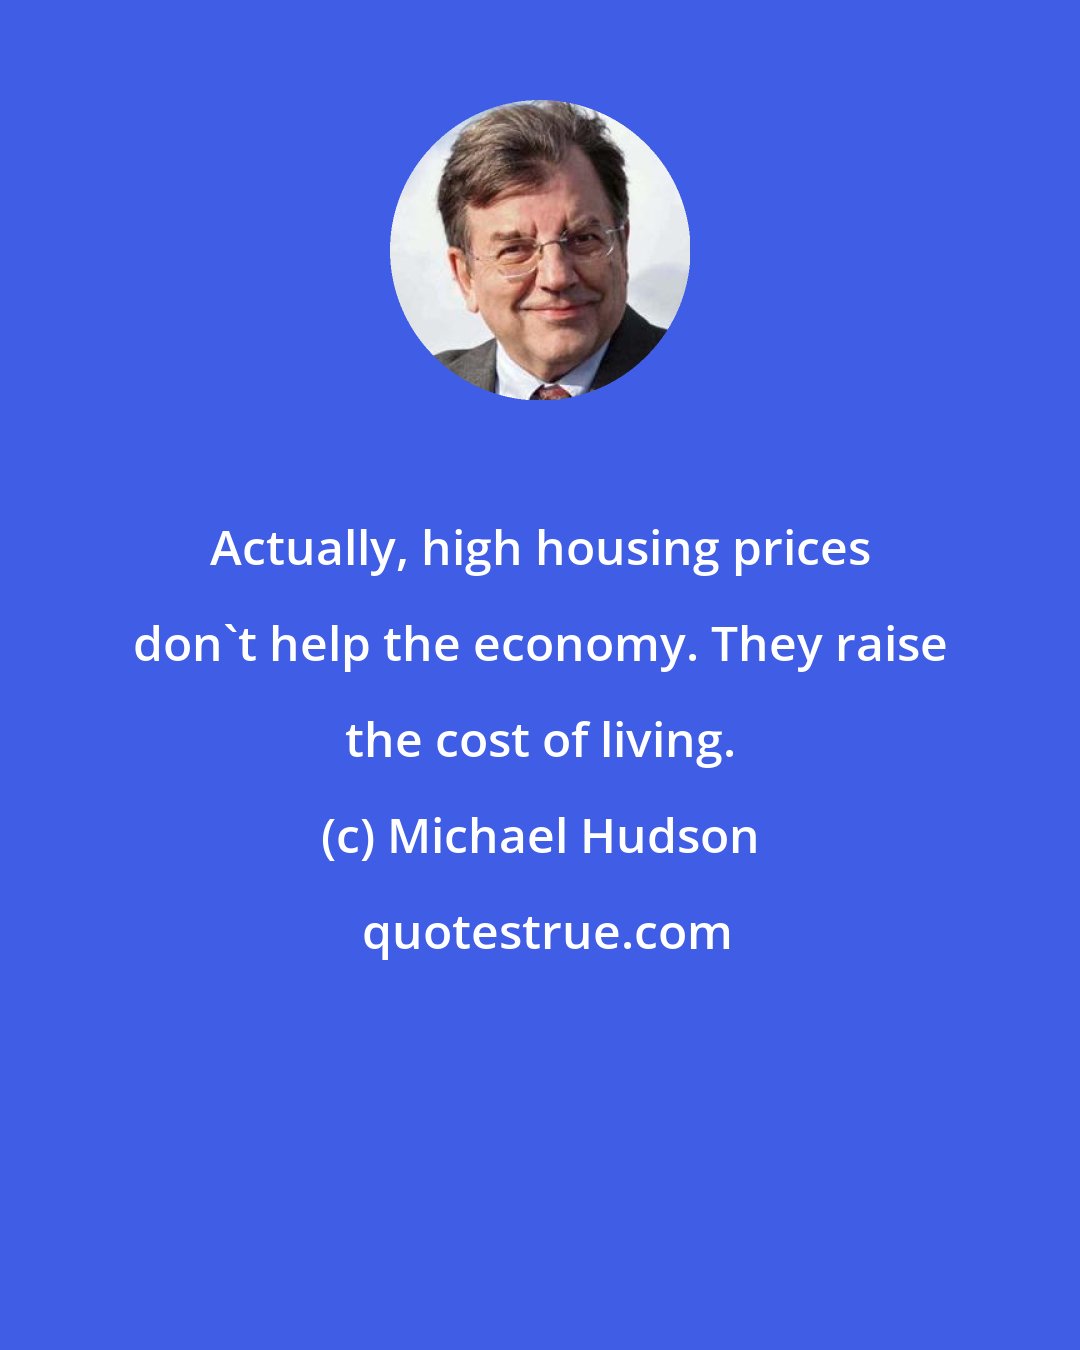 Michael Hudson: Actually, high housing prices don't help the economy. They raise the cost of living.